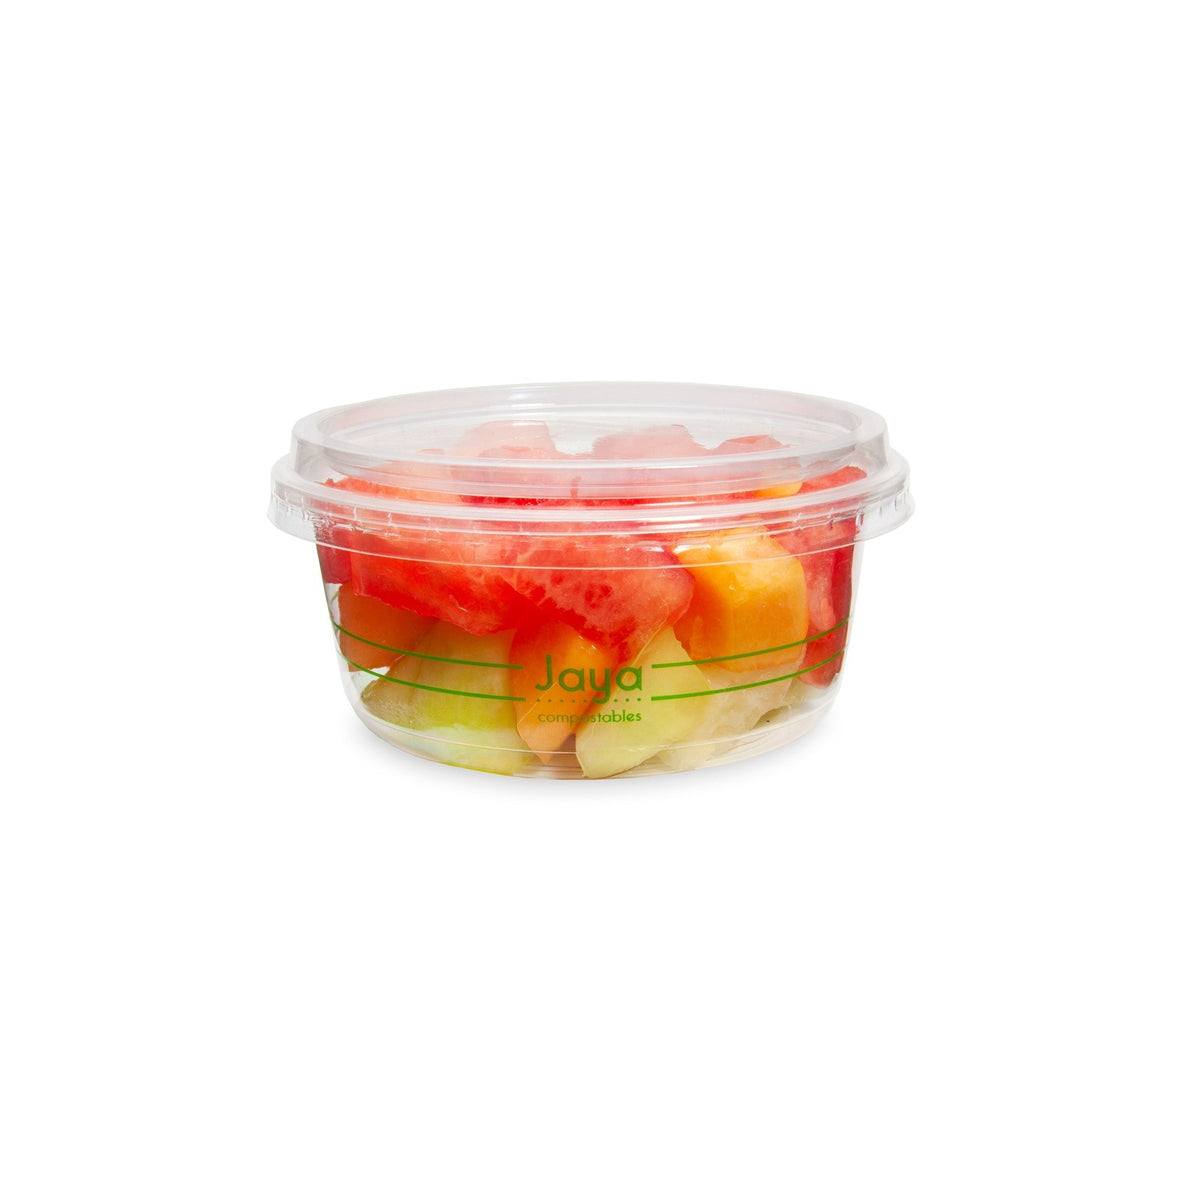 Eco-Products PLA Clear Round Deli Container - 12 oz - EP-RDP12